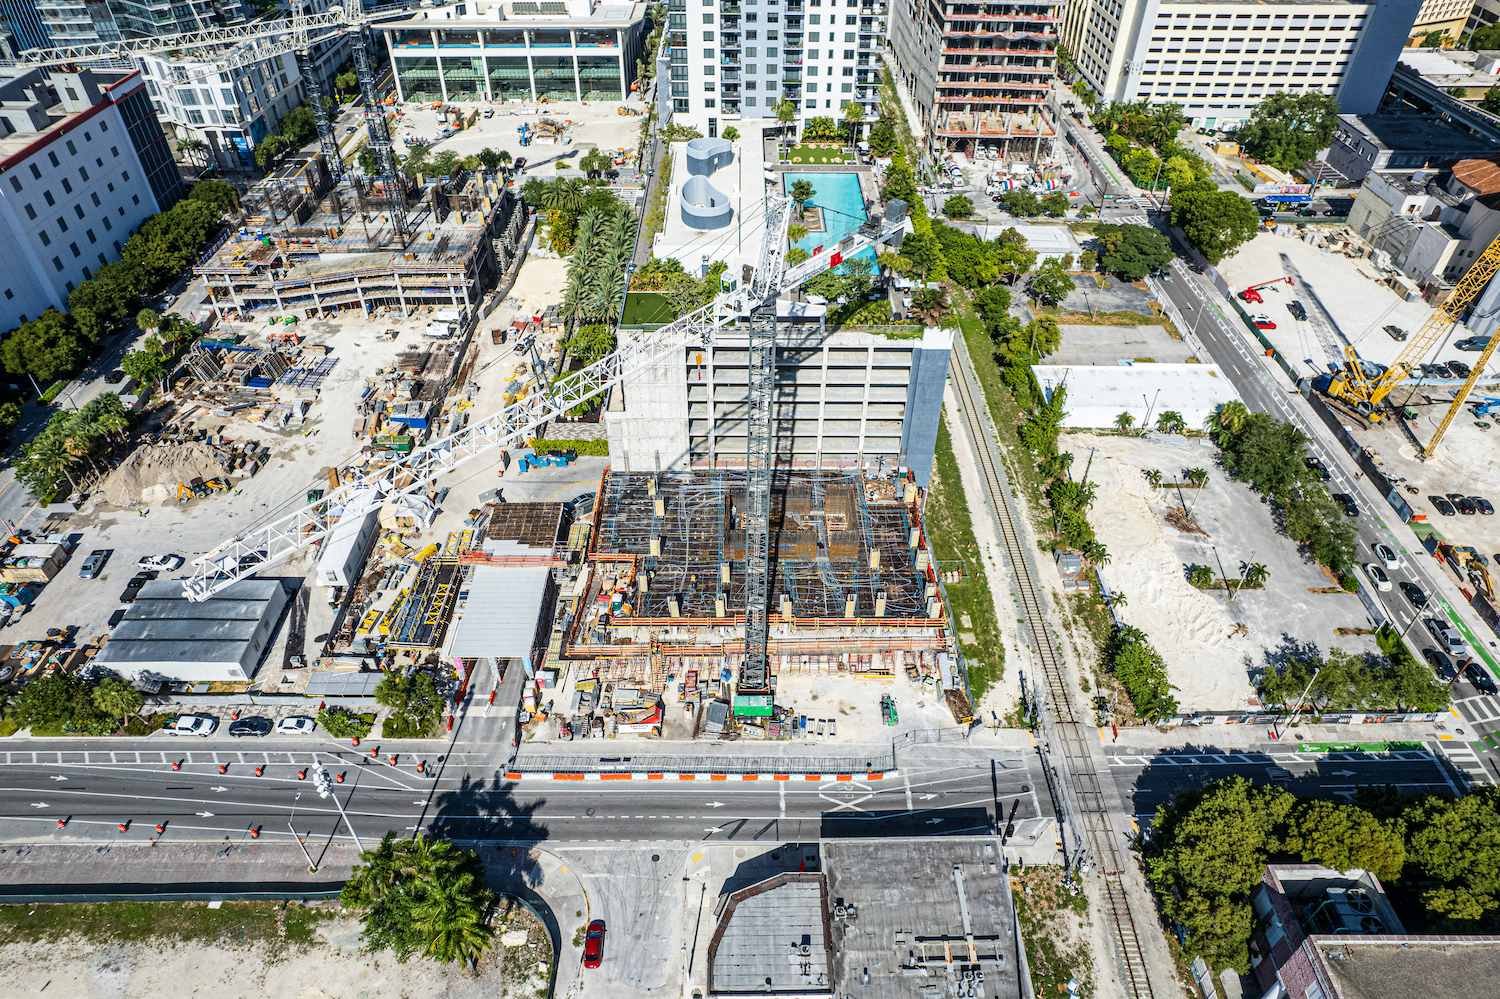 MIAMI, Caoba Worldcenter, 442 + 413 FT